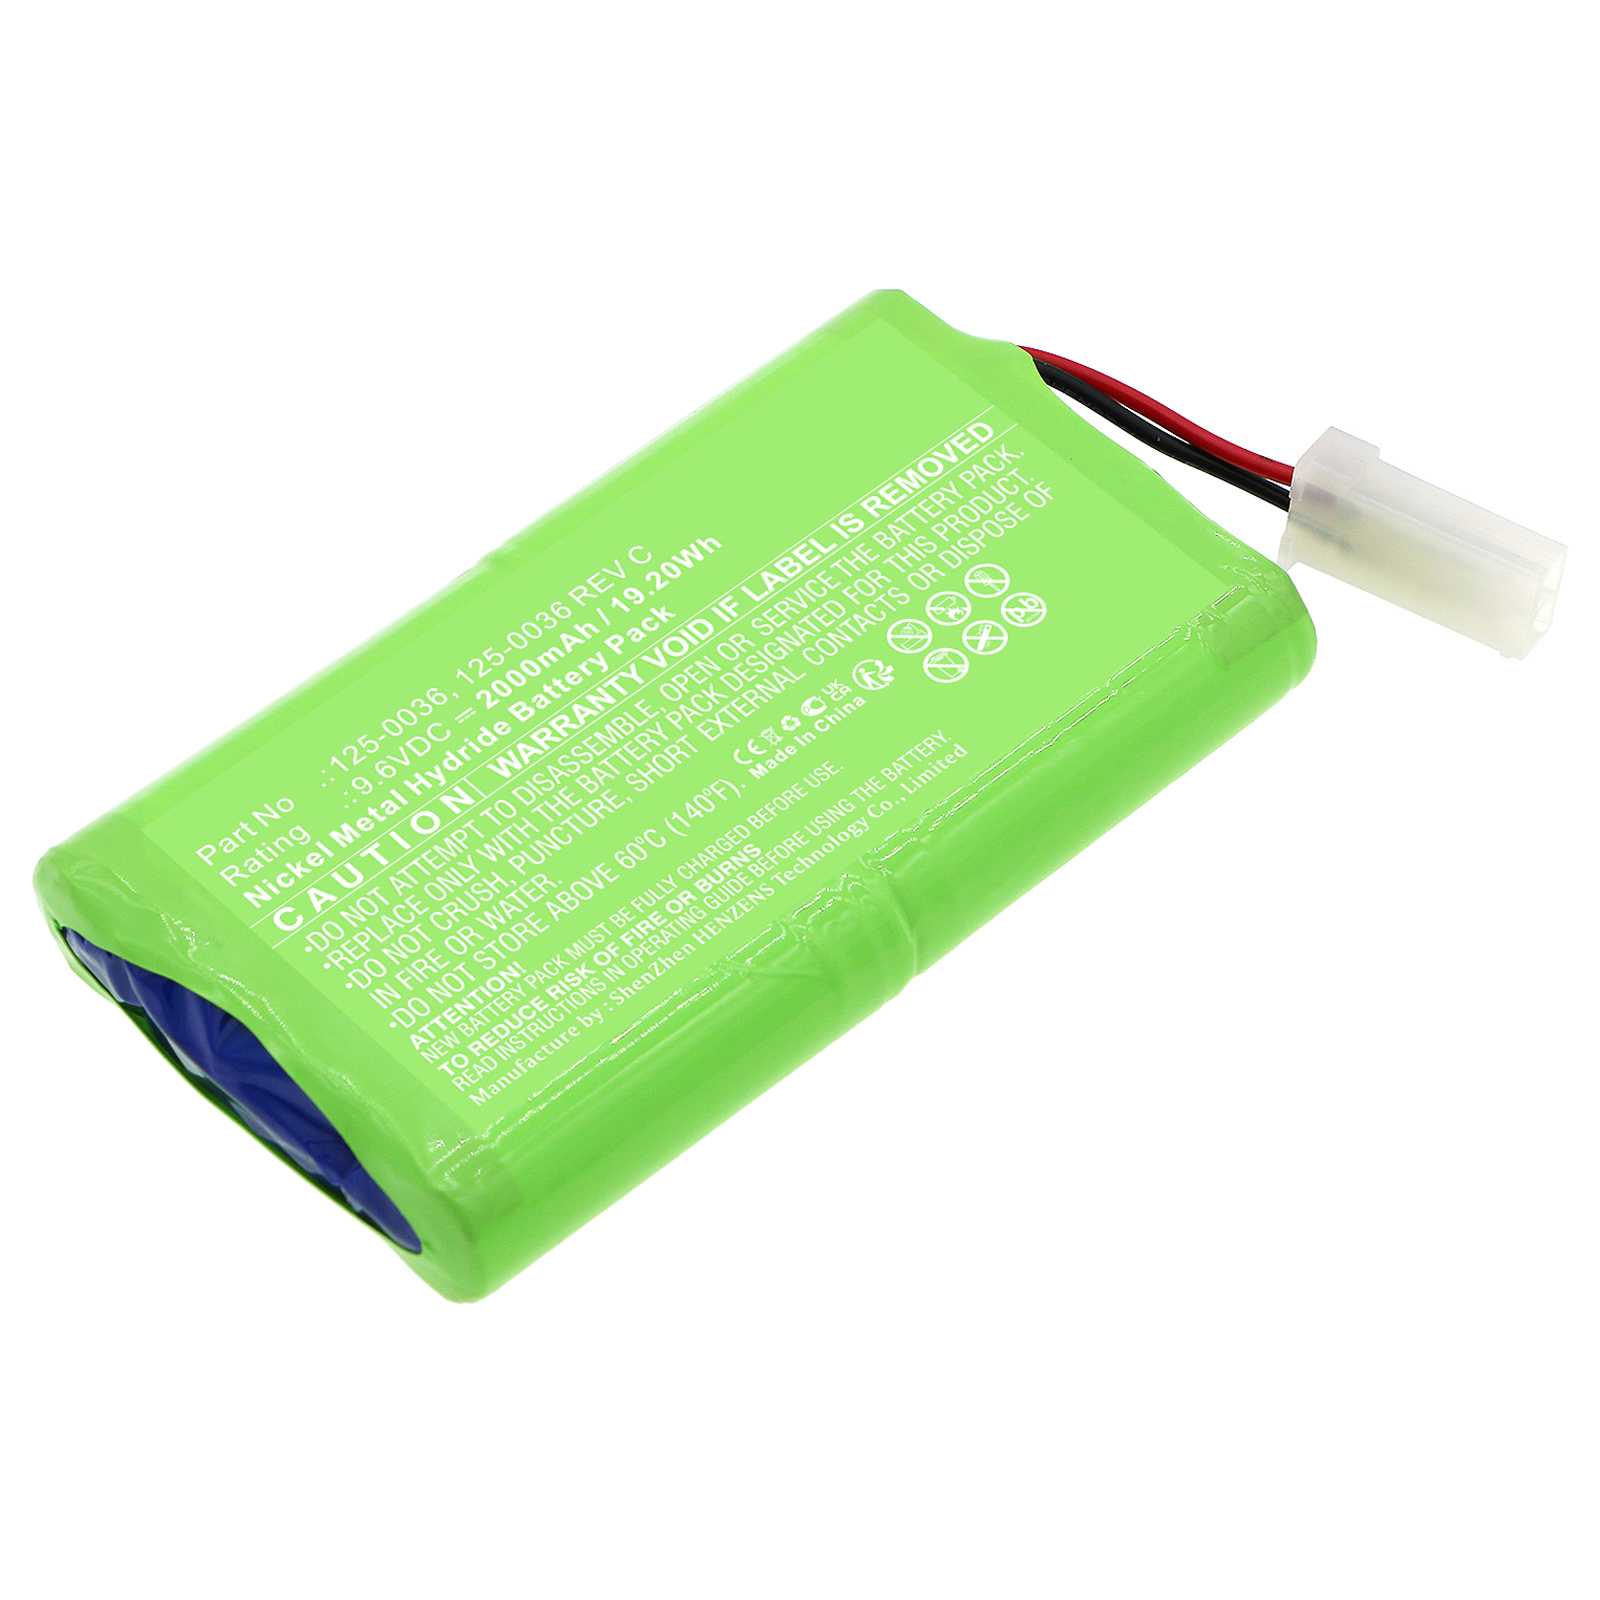 Synergy Digital Equipment Battery, Compatible with Franklin 125-0036 Equipment Battery (Ni-MH, 9.6V, 2000mAh)